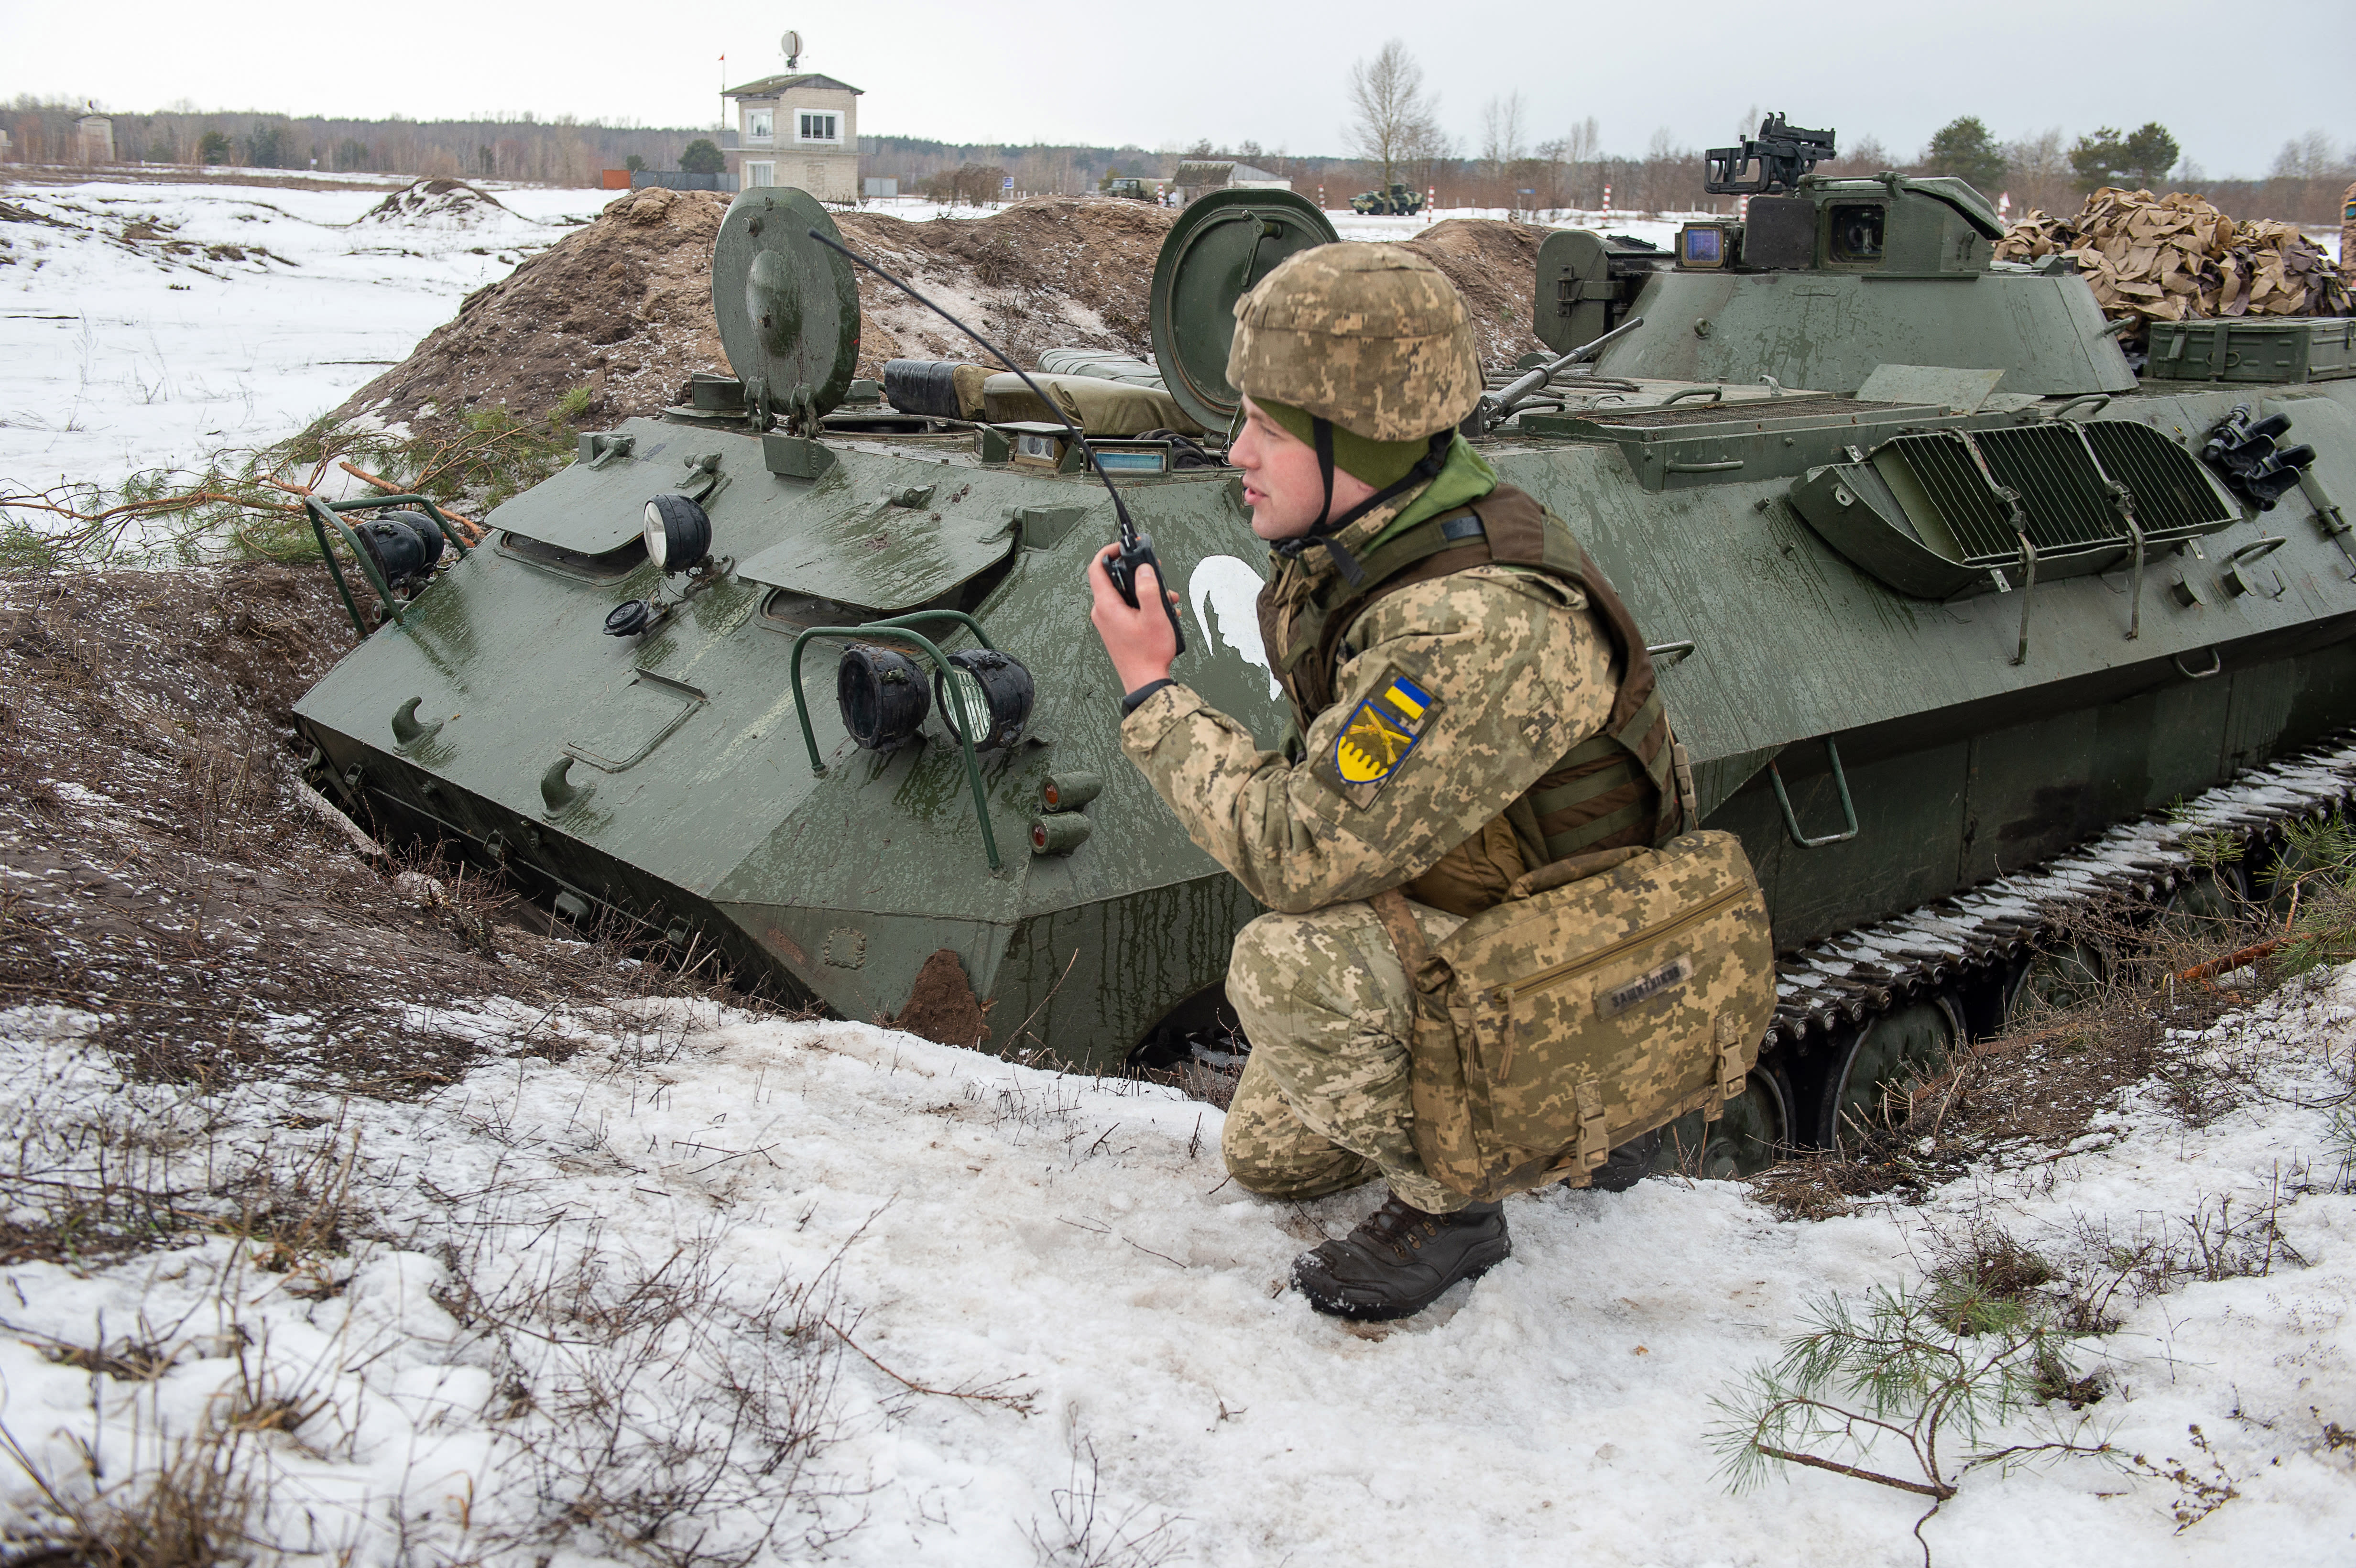 A Ukrainian Military Forces serviceman of the 92nd mechanised brigade takes part in live-fire exercises near the town of Chuguev, Kharkiv region on Feb 10, 2022.